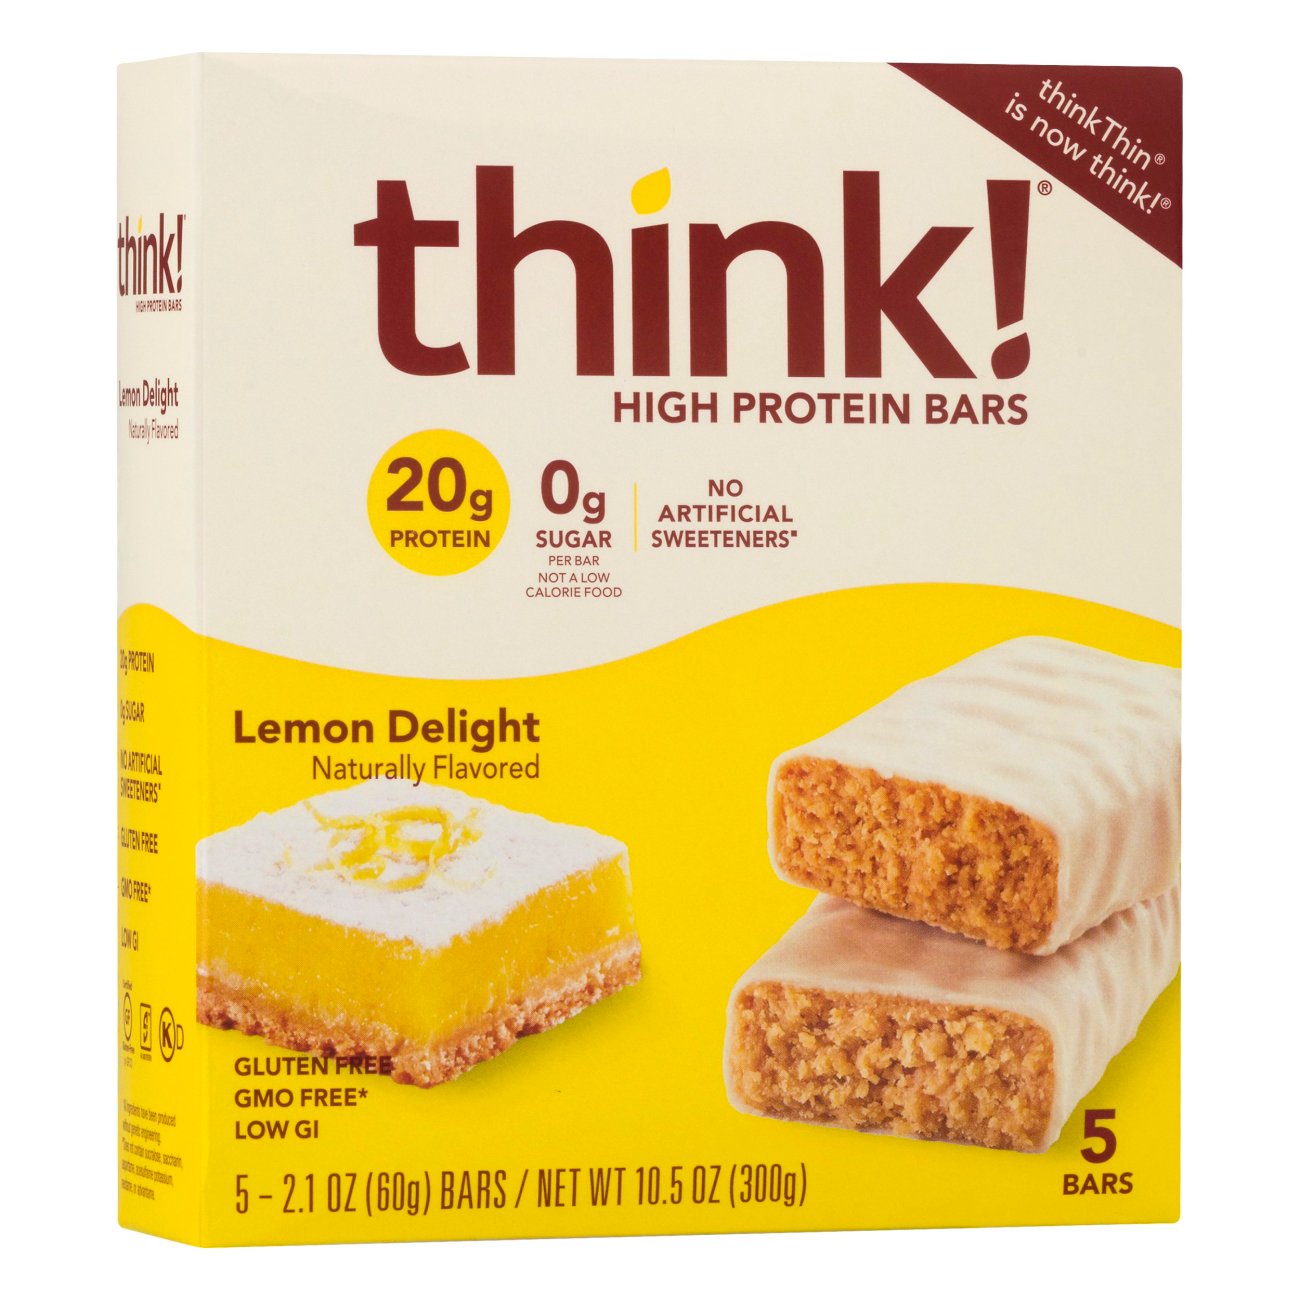 think! Lemon Delight High Protein Bars - Shop Snacks & Candy at H-E-B